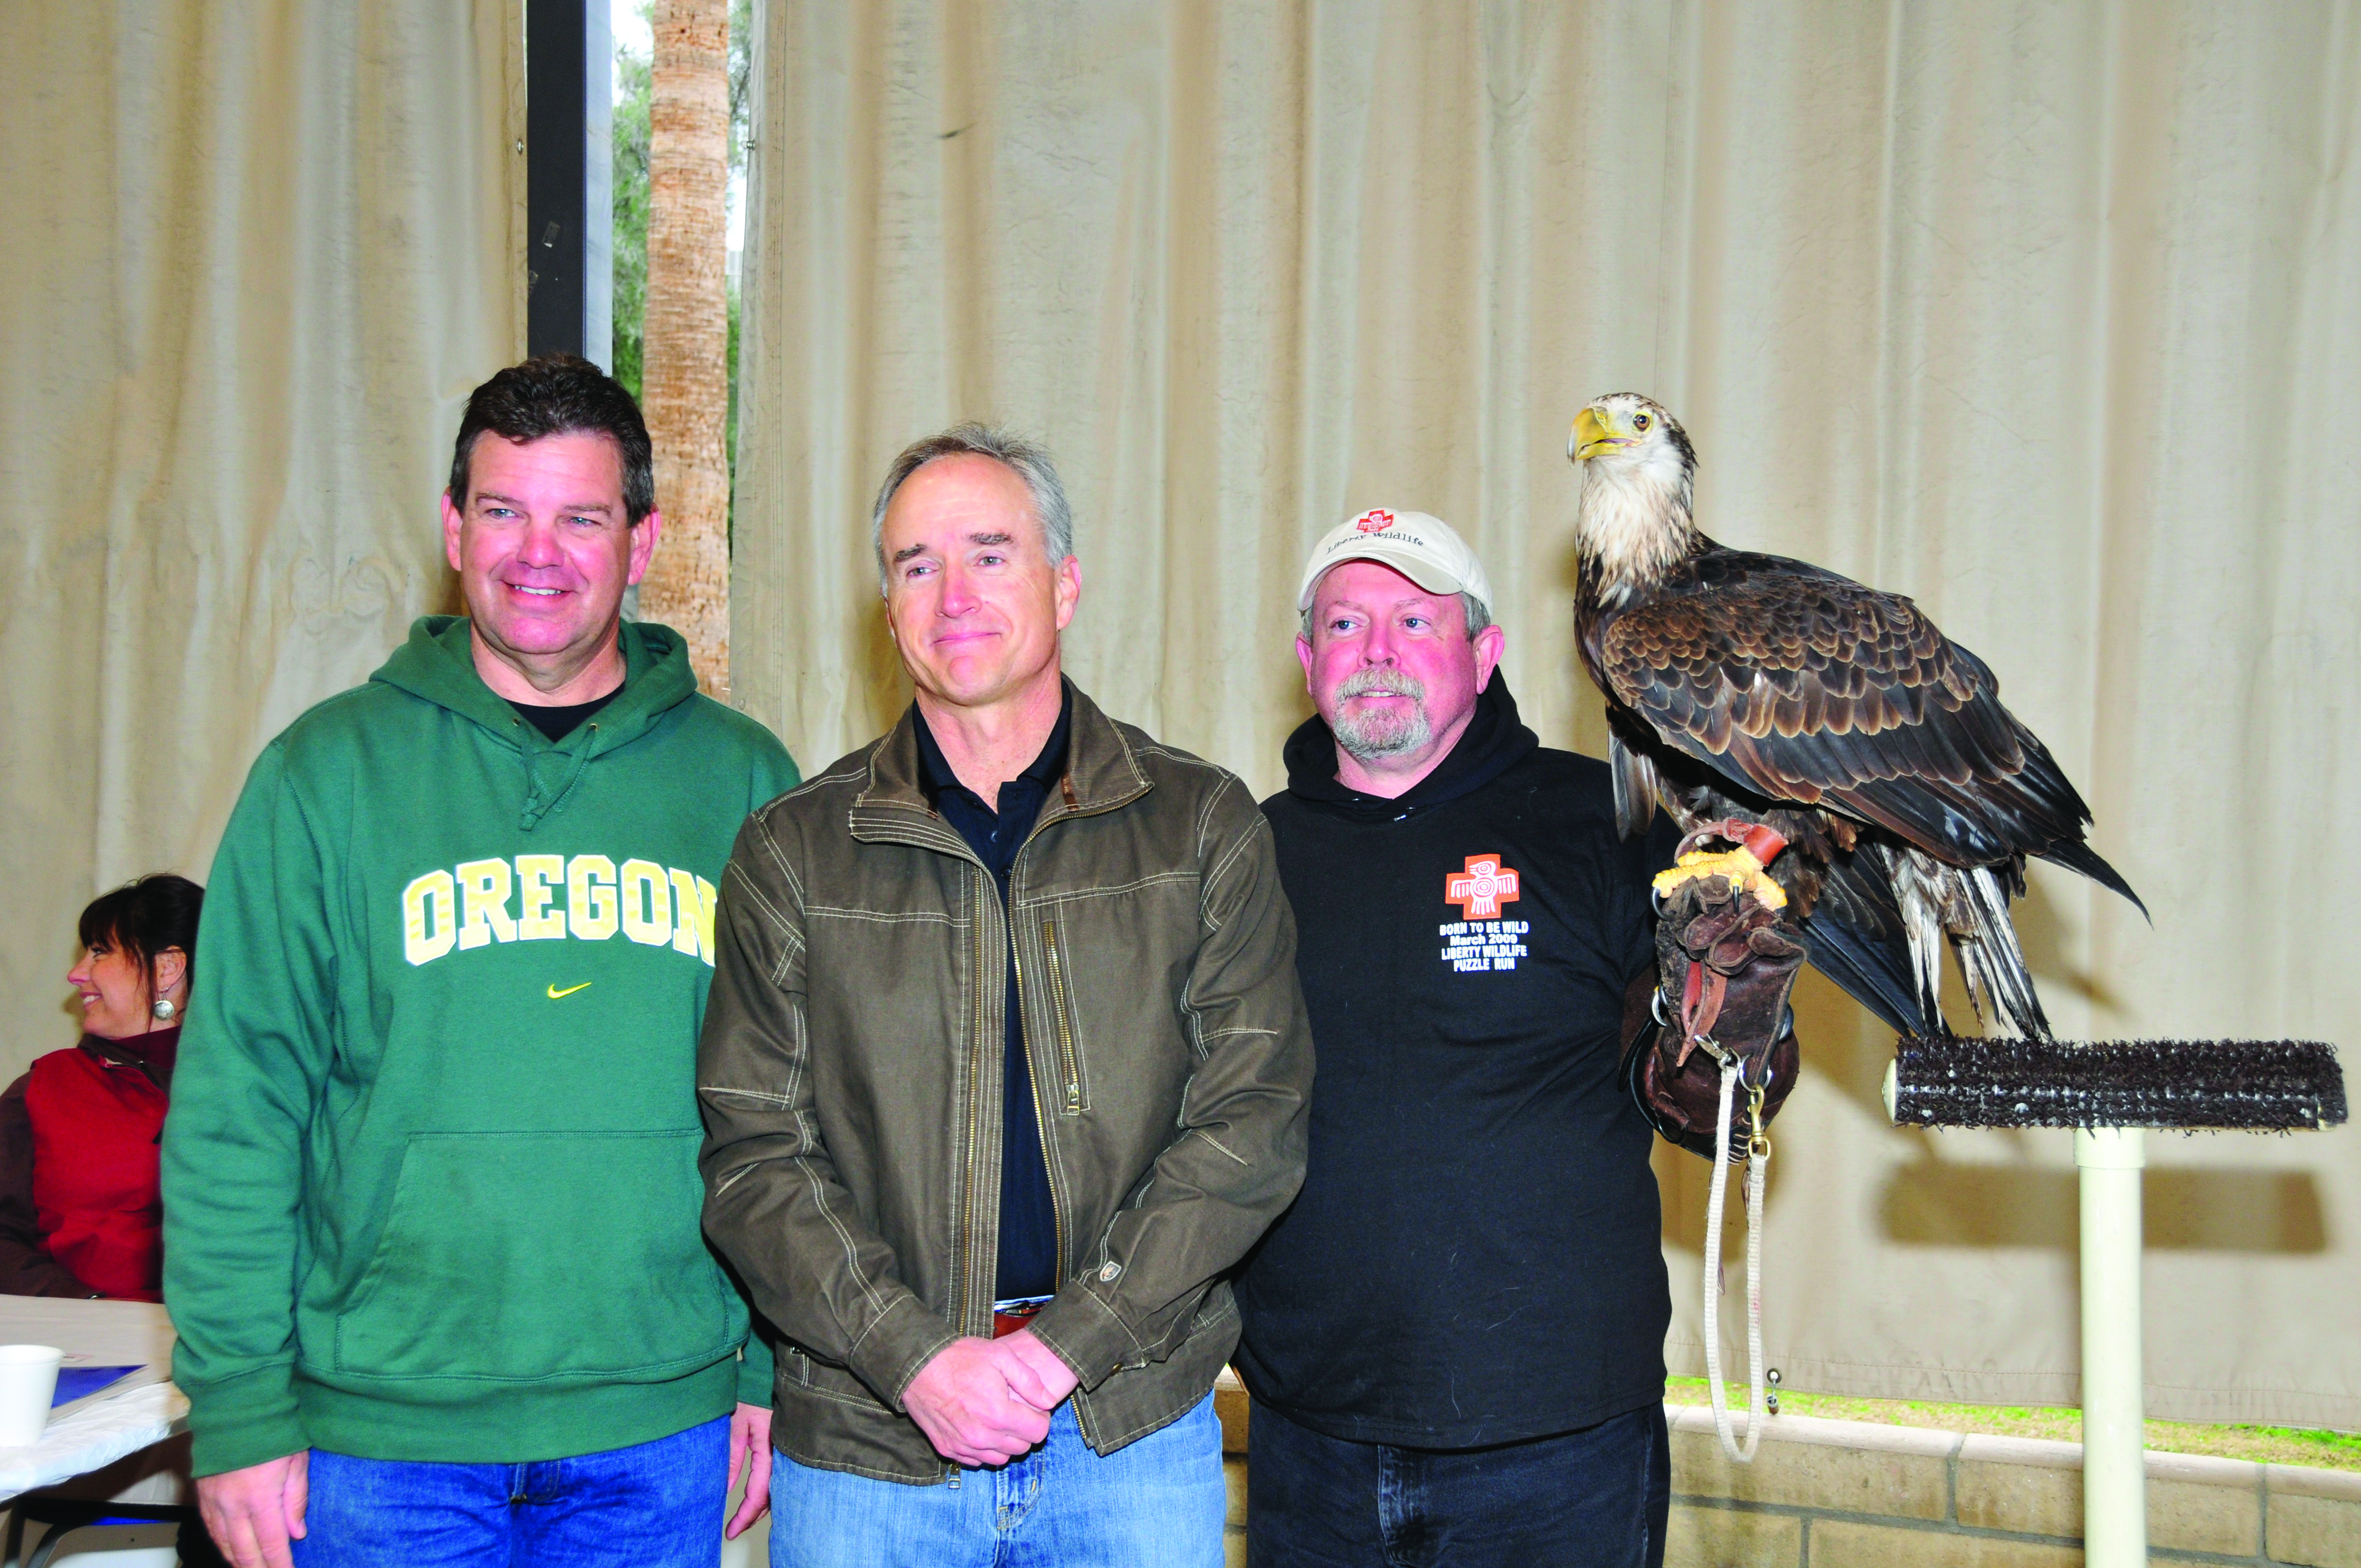 Rousseau with Liberty Wildlife at an Electrical Safety Workshop. Photo by Kevin F Coons.